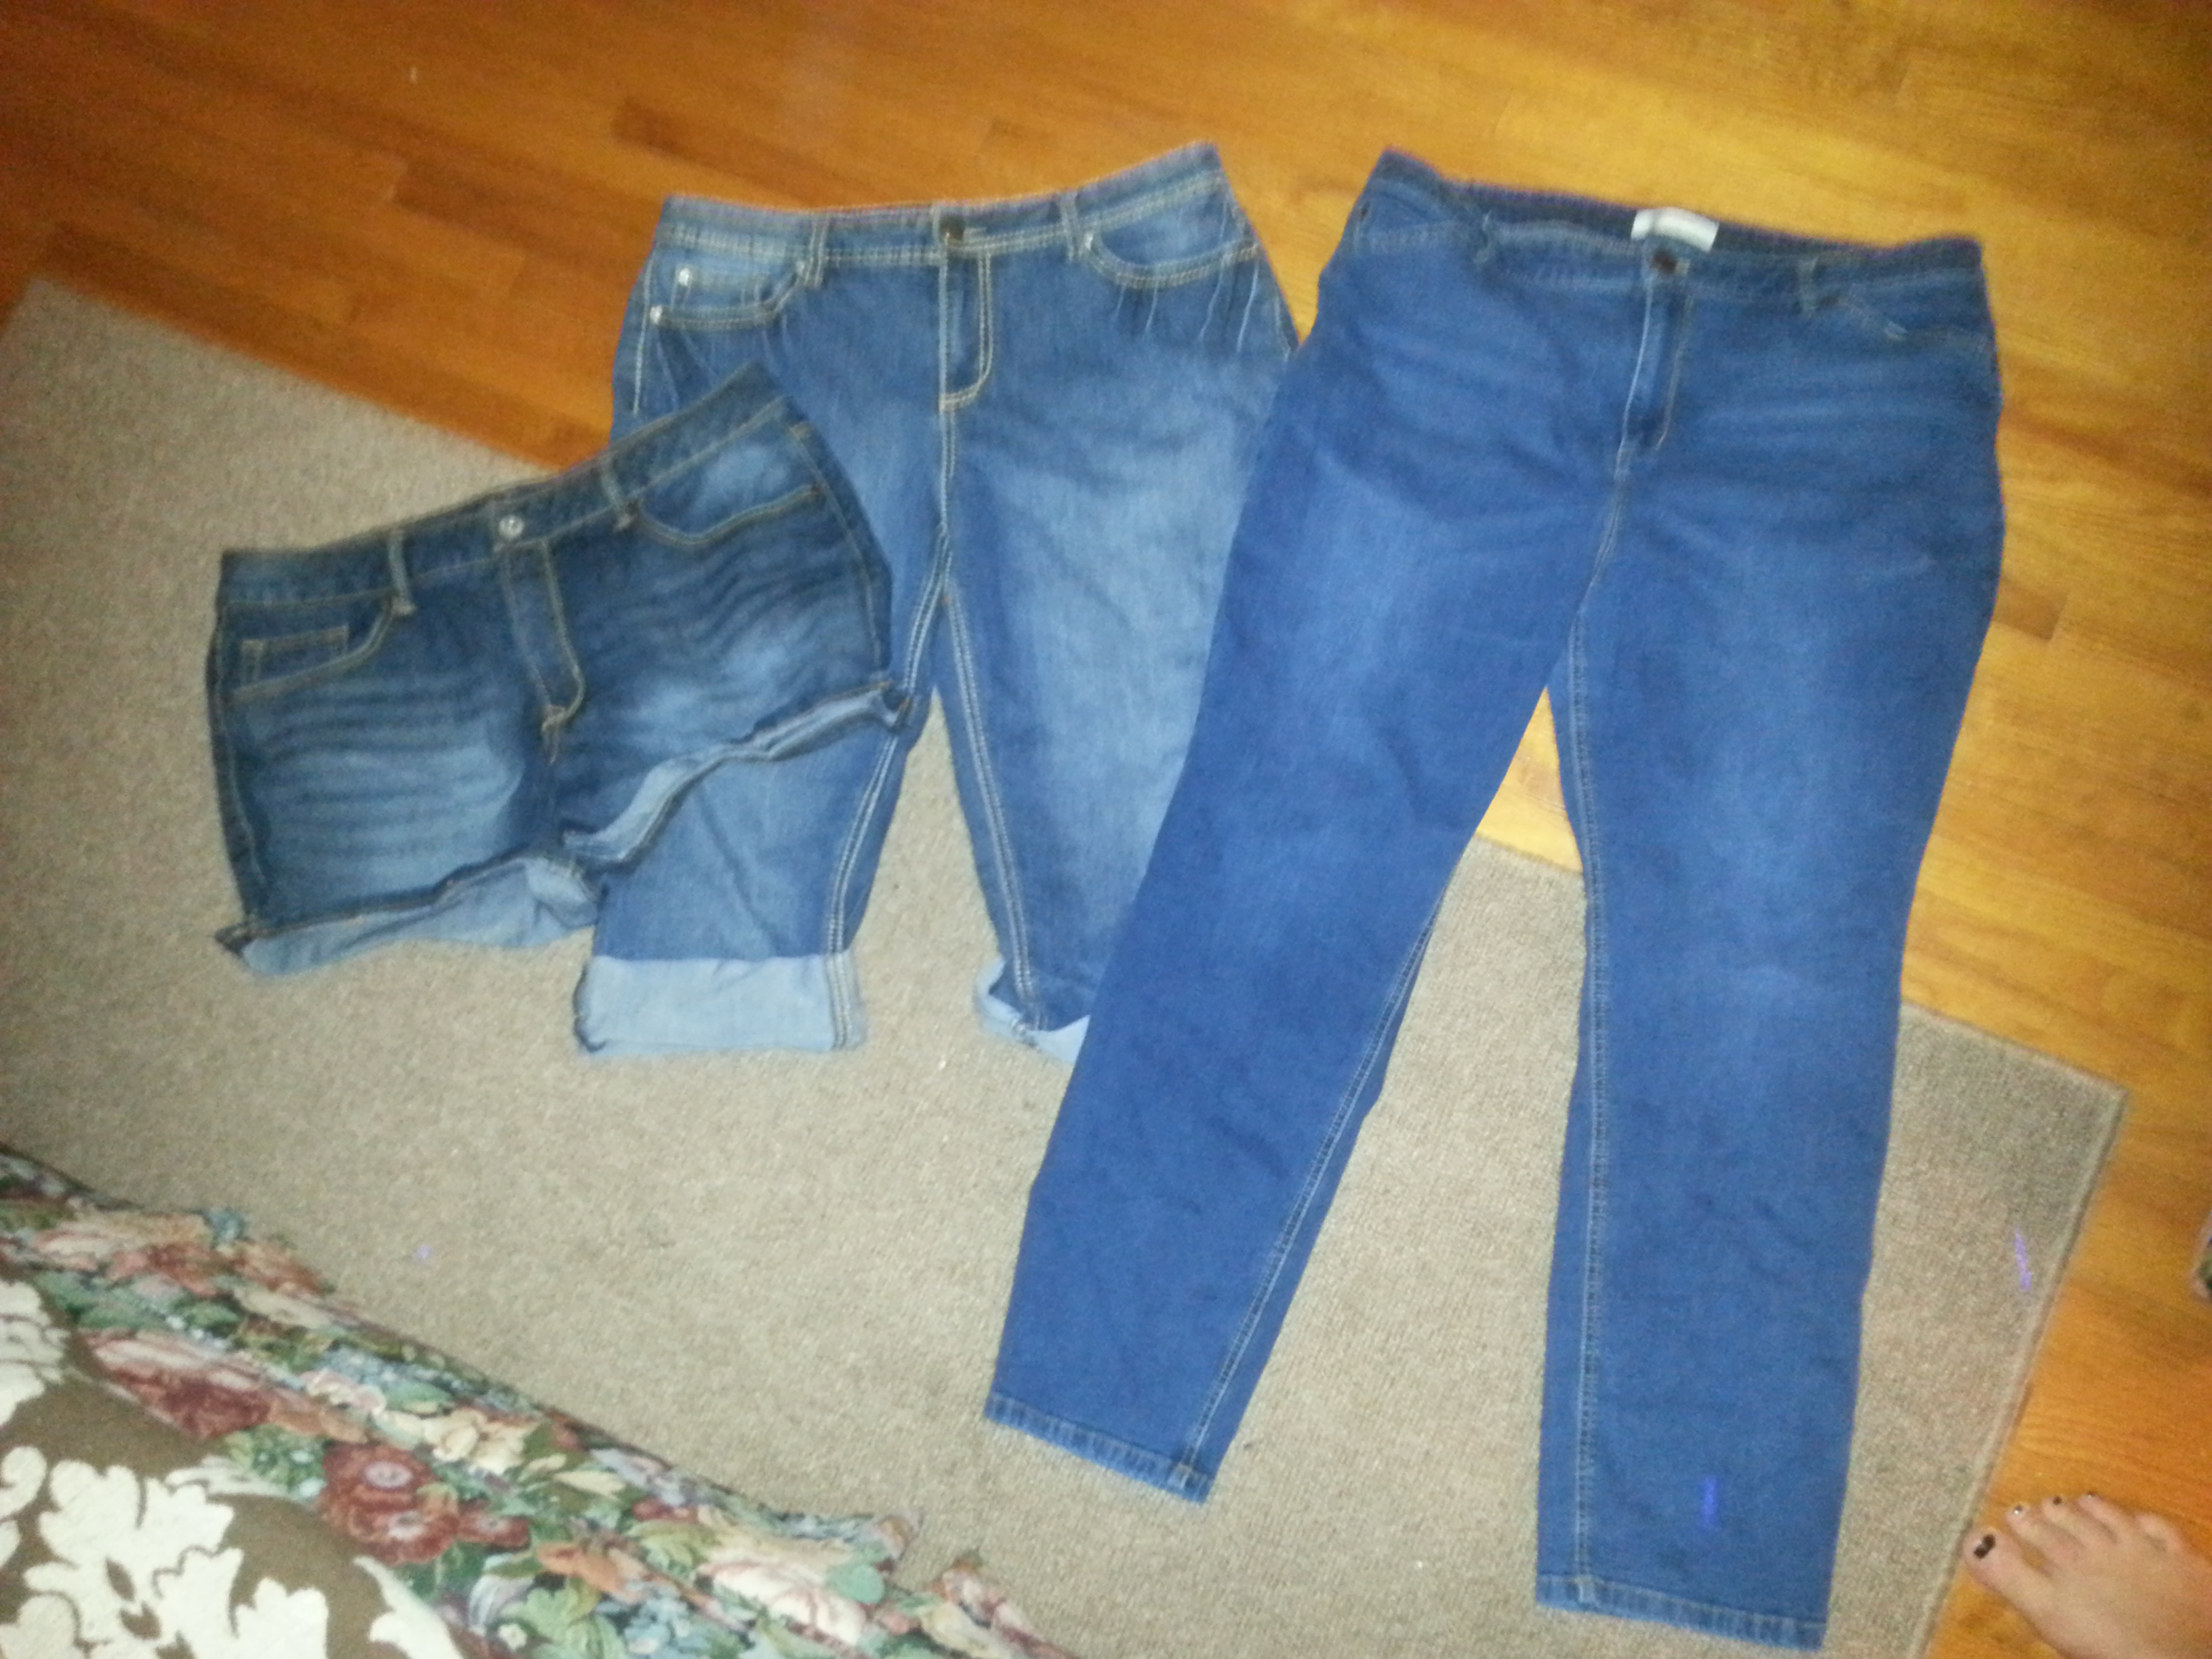 too big jeans beinh sold on ebay